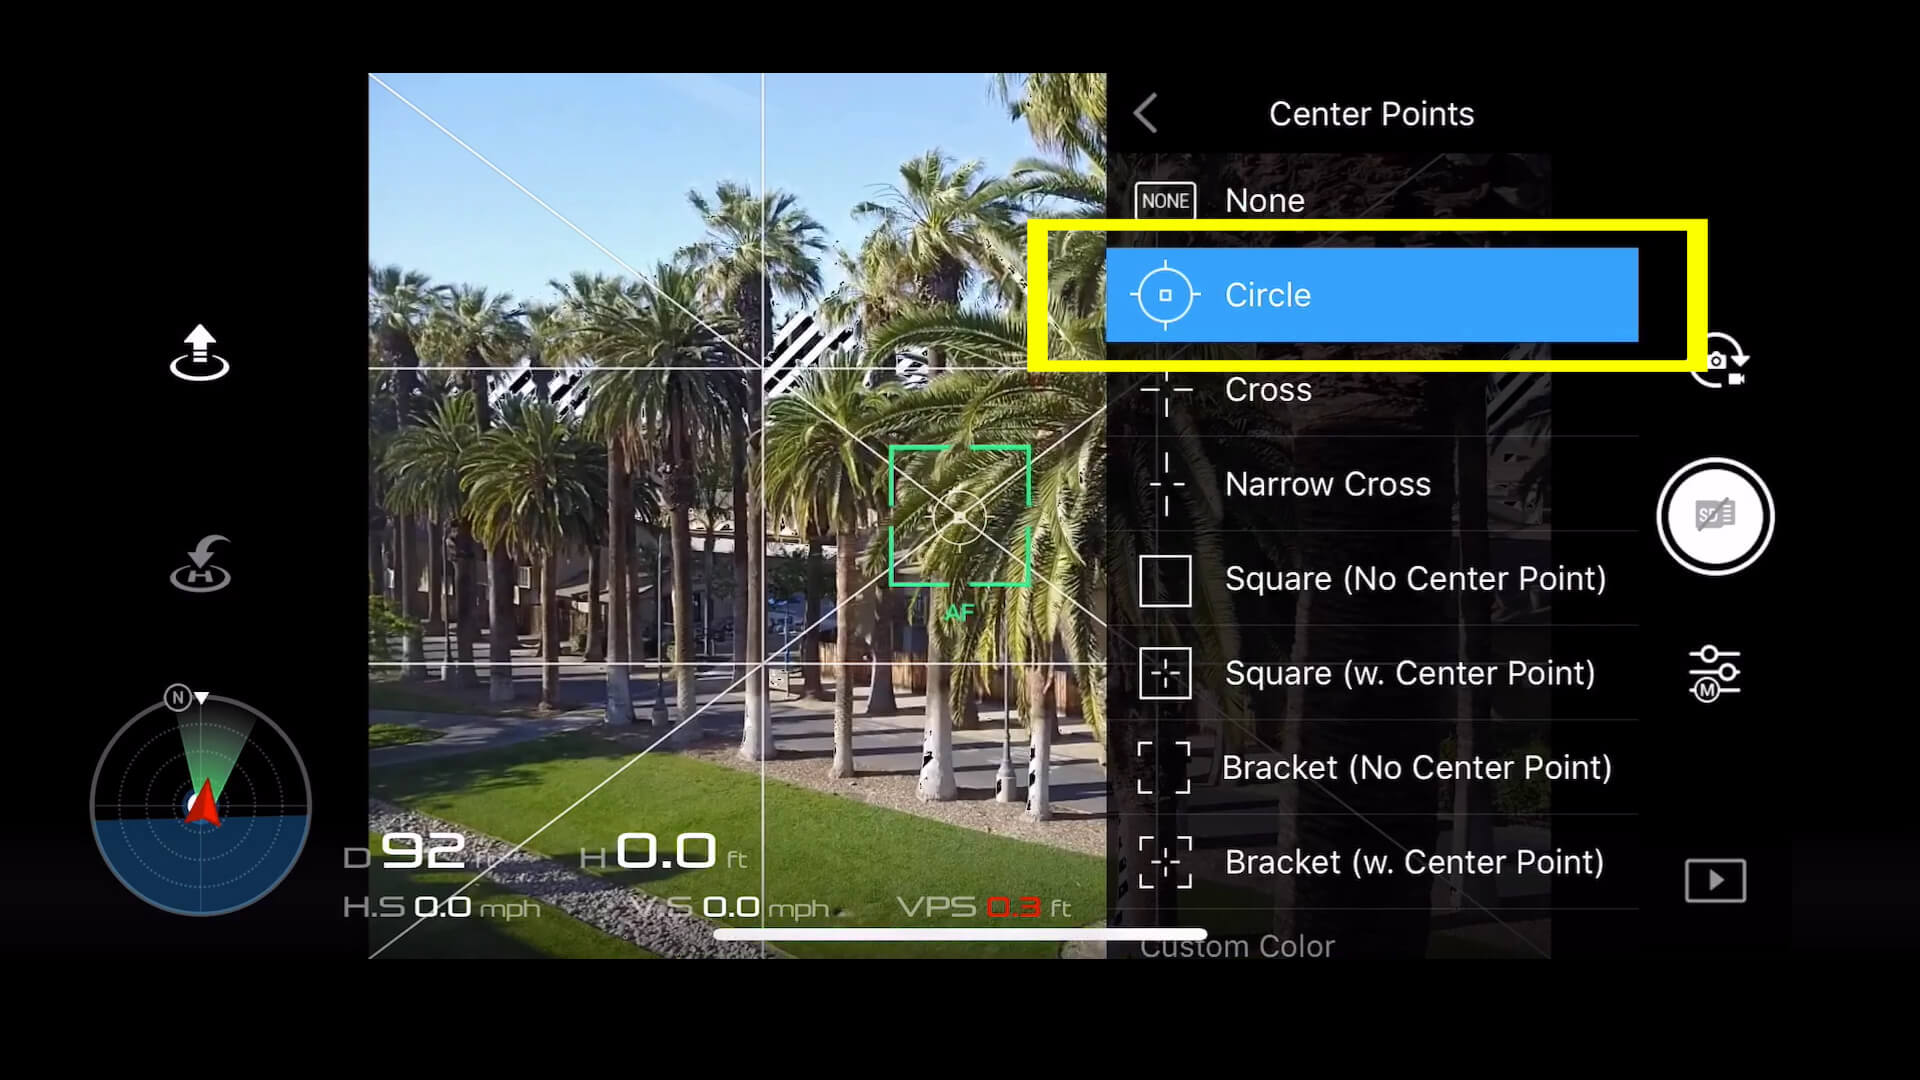 15 basic camera settings for dji drone photos - center point